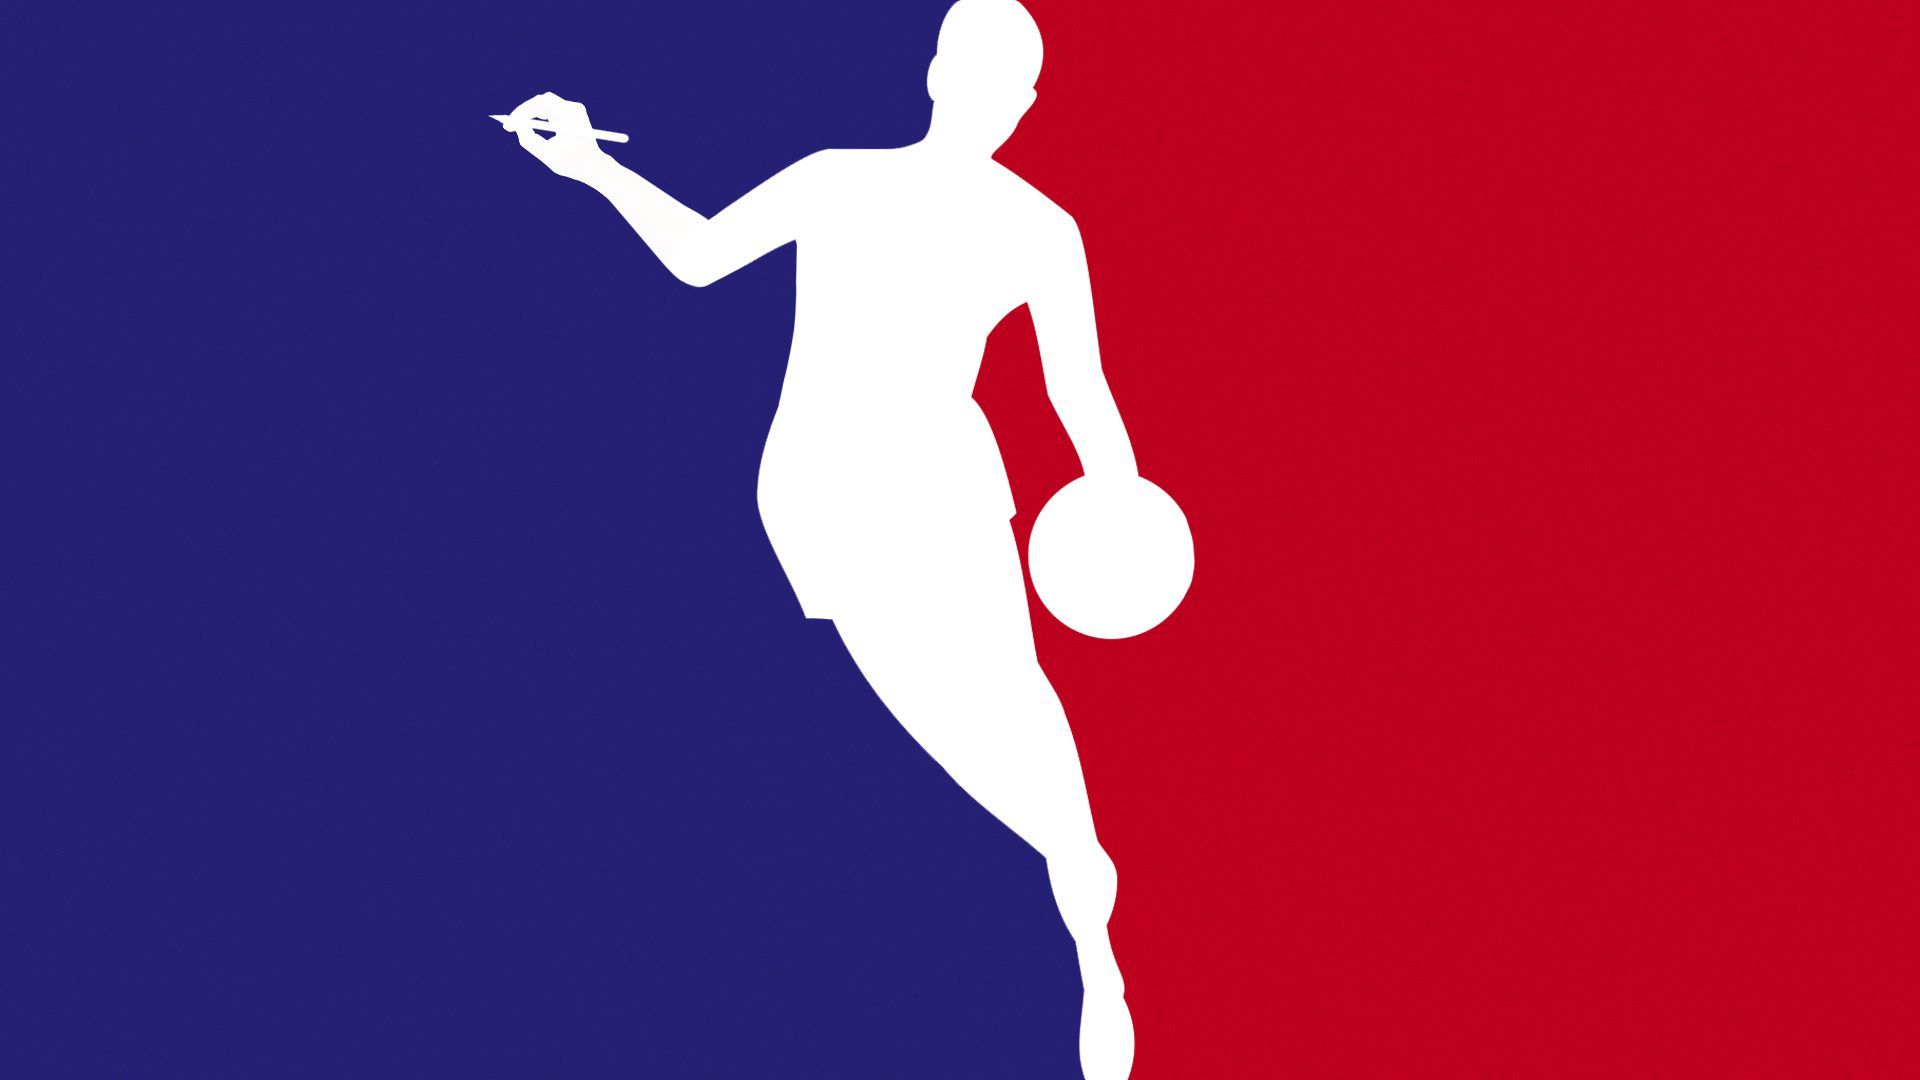 Illustration referencing of the NBA logo, with a basketball player bouncing a basketball in their left hand, and writing implement in their left hand